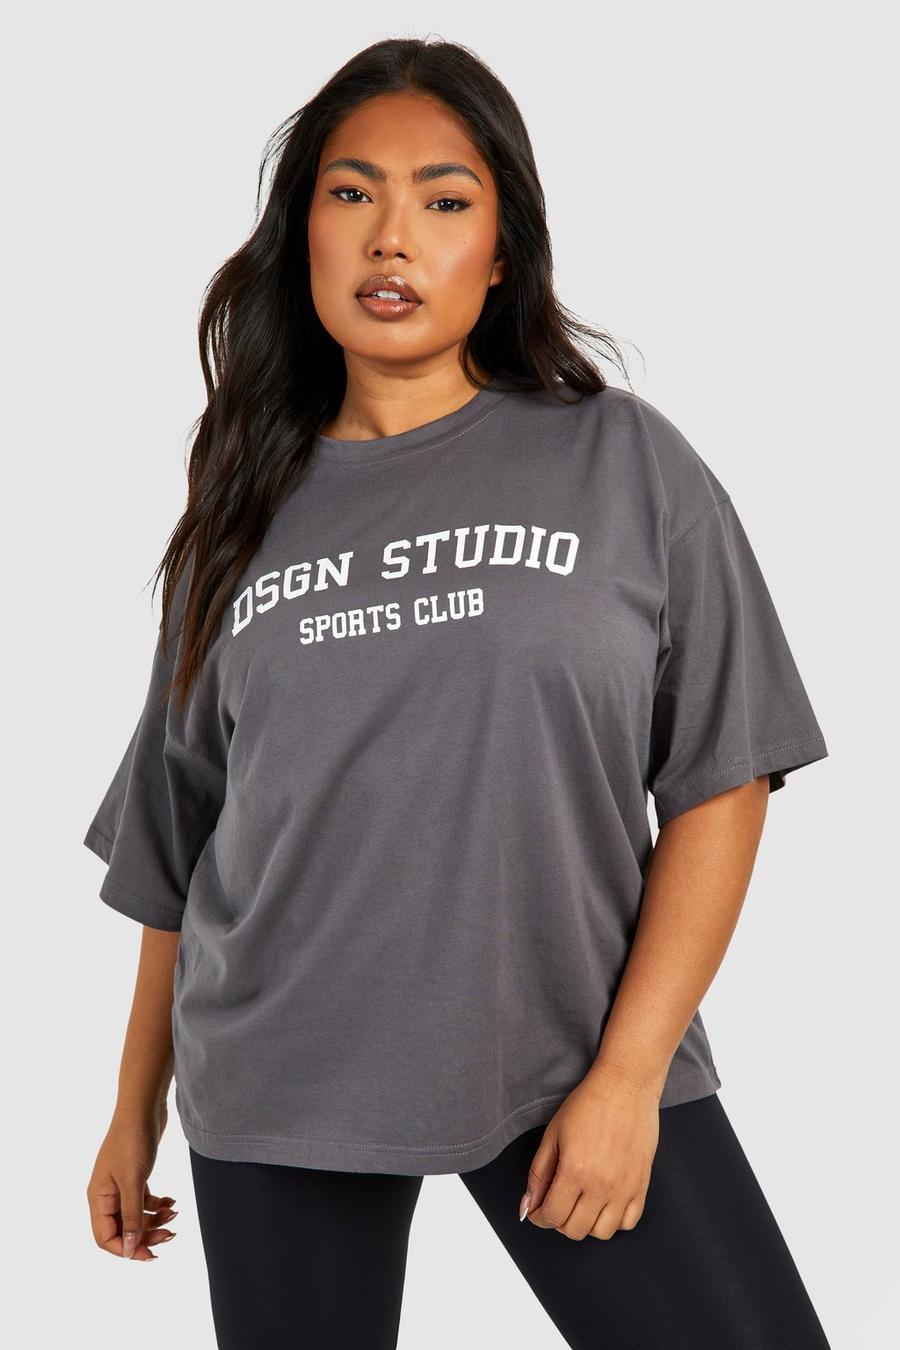 Charcoal Plus Dsgn Studio Sports Club Oversized T-shirt  image number 1